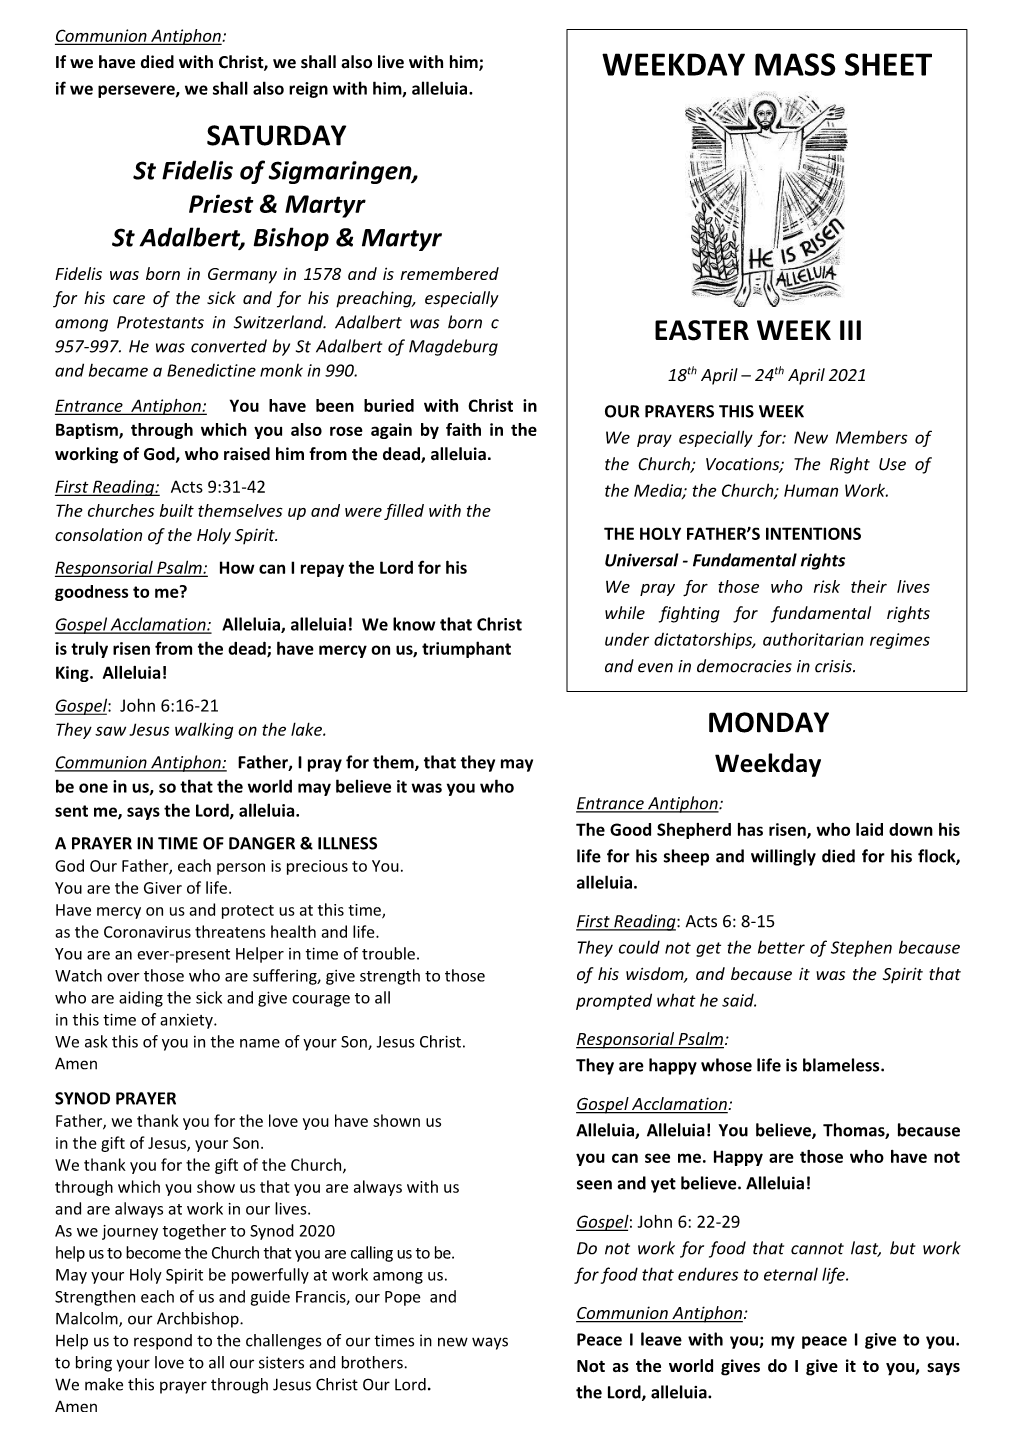 WEEKDAY MASS SHEET If We Persevere, We Shall Also Reign with Him, Alleluia